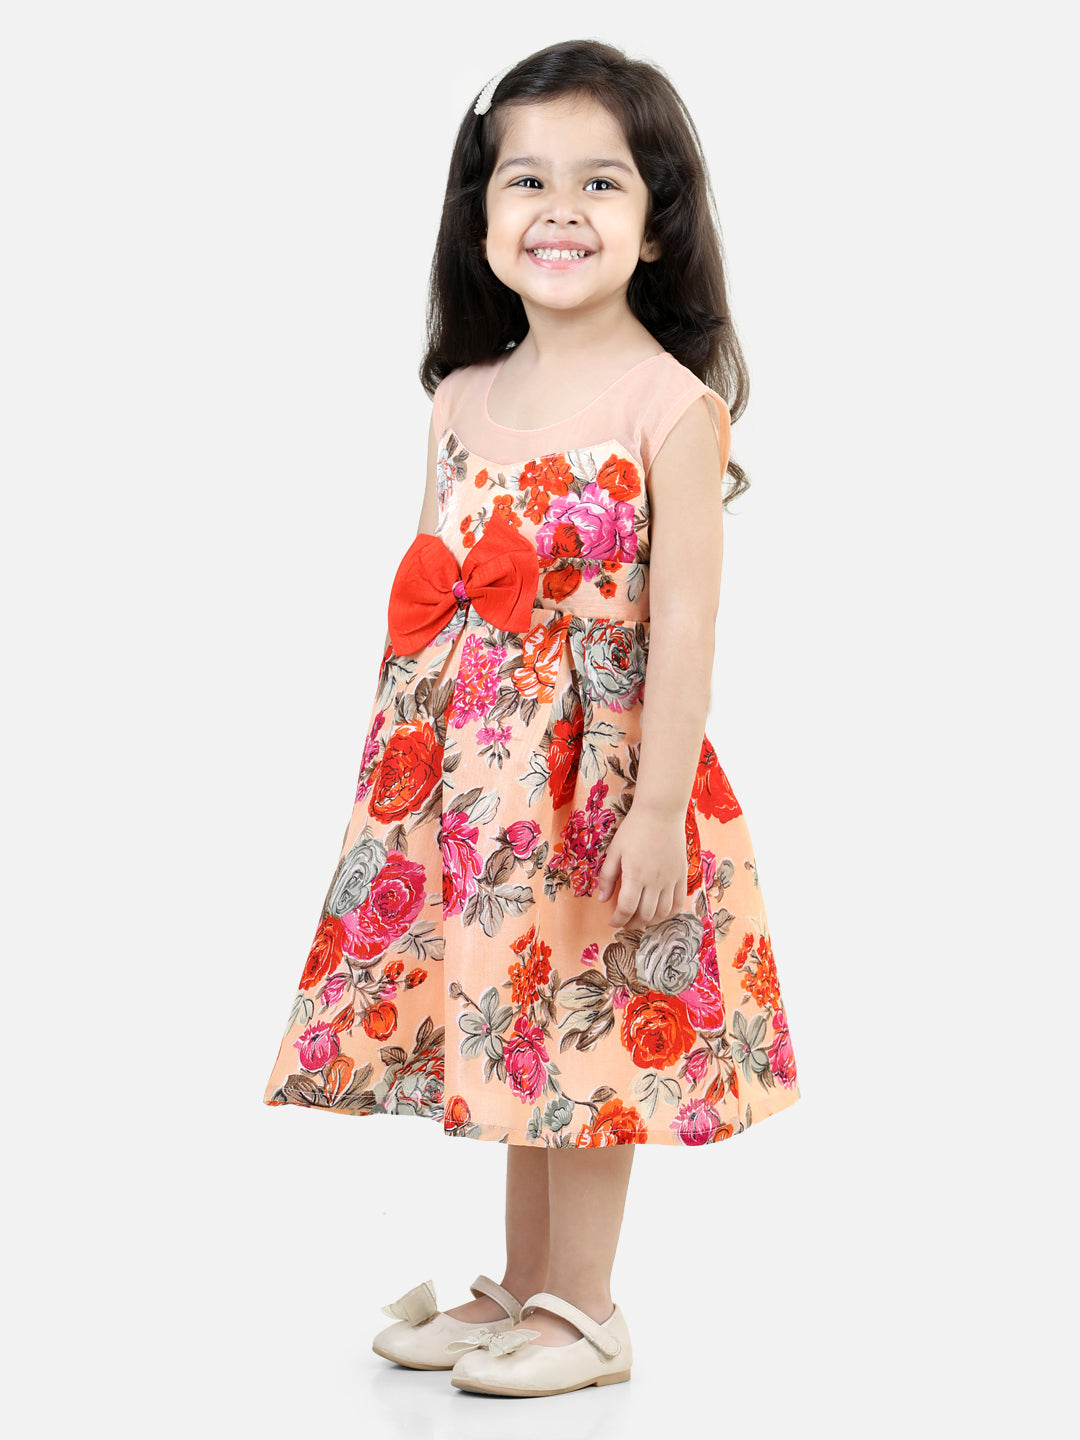 BownBee Illusion Neck Floral Print Party Frock Dress for Girls- Orange